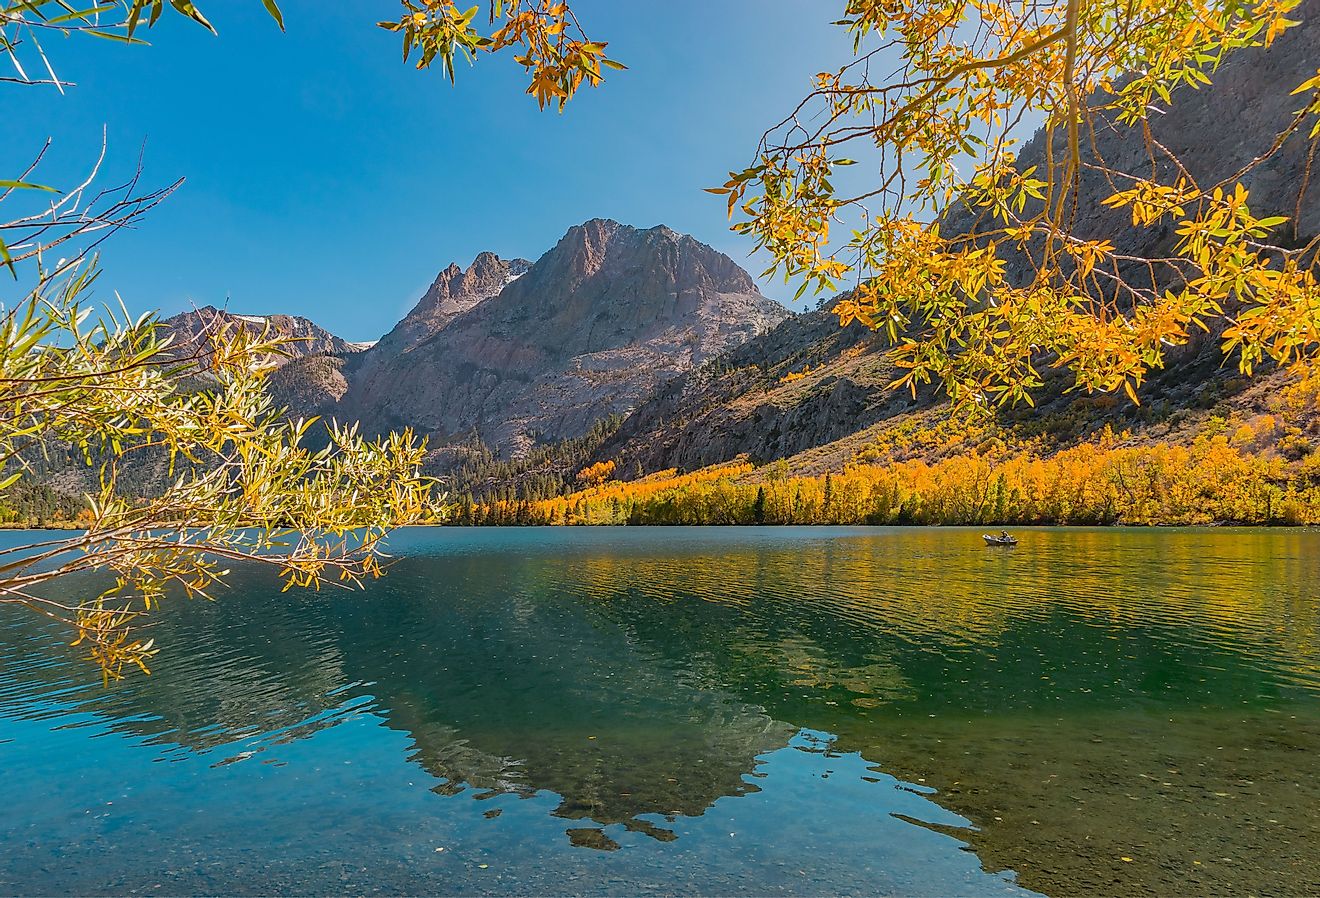 Willow and Aspen trees are golden in Autumn and surround Silver Lake at June Lake Loop in the Californian Sierra Nevada mountains of California